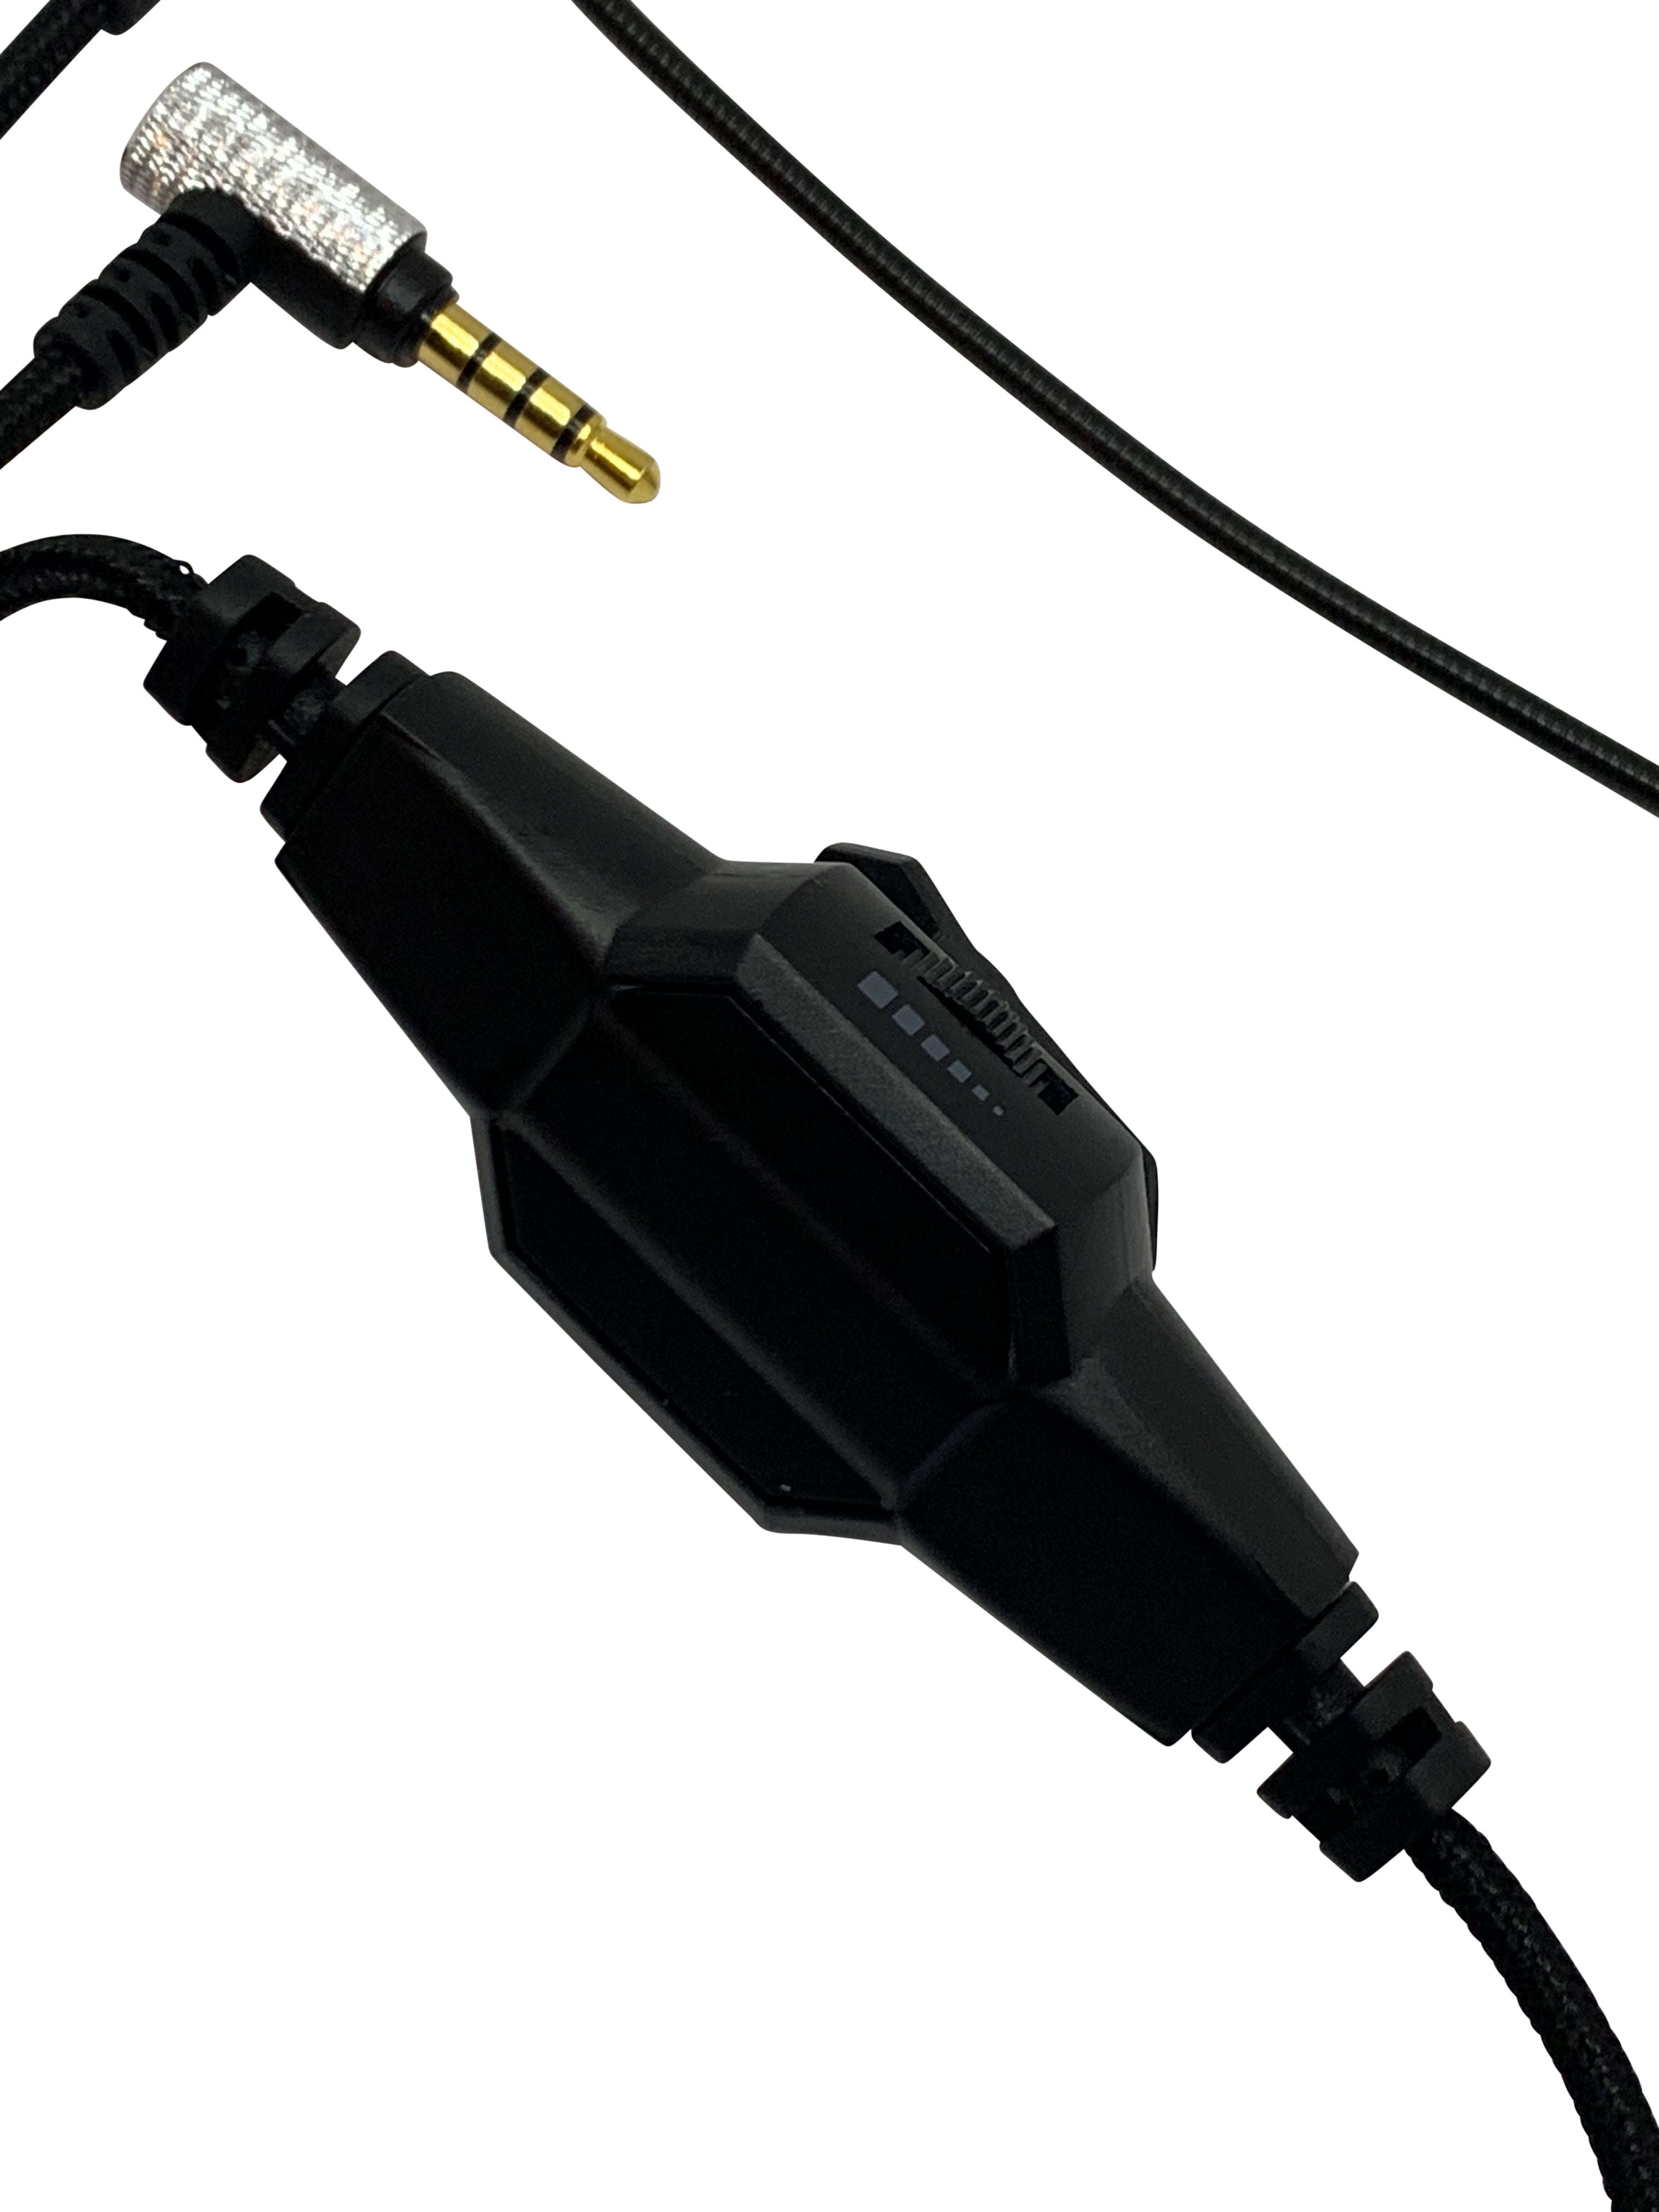 Gaming Headset Mic Boom Adapter for Bose 700 NC700 Noise Canceling Headphones - CentralSound